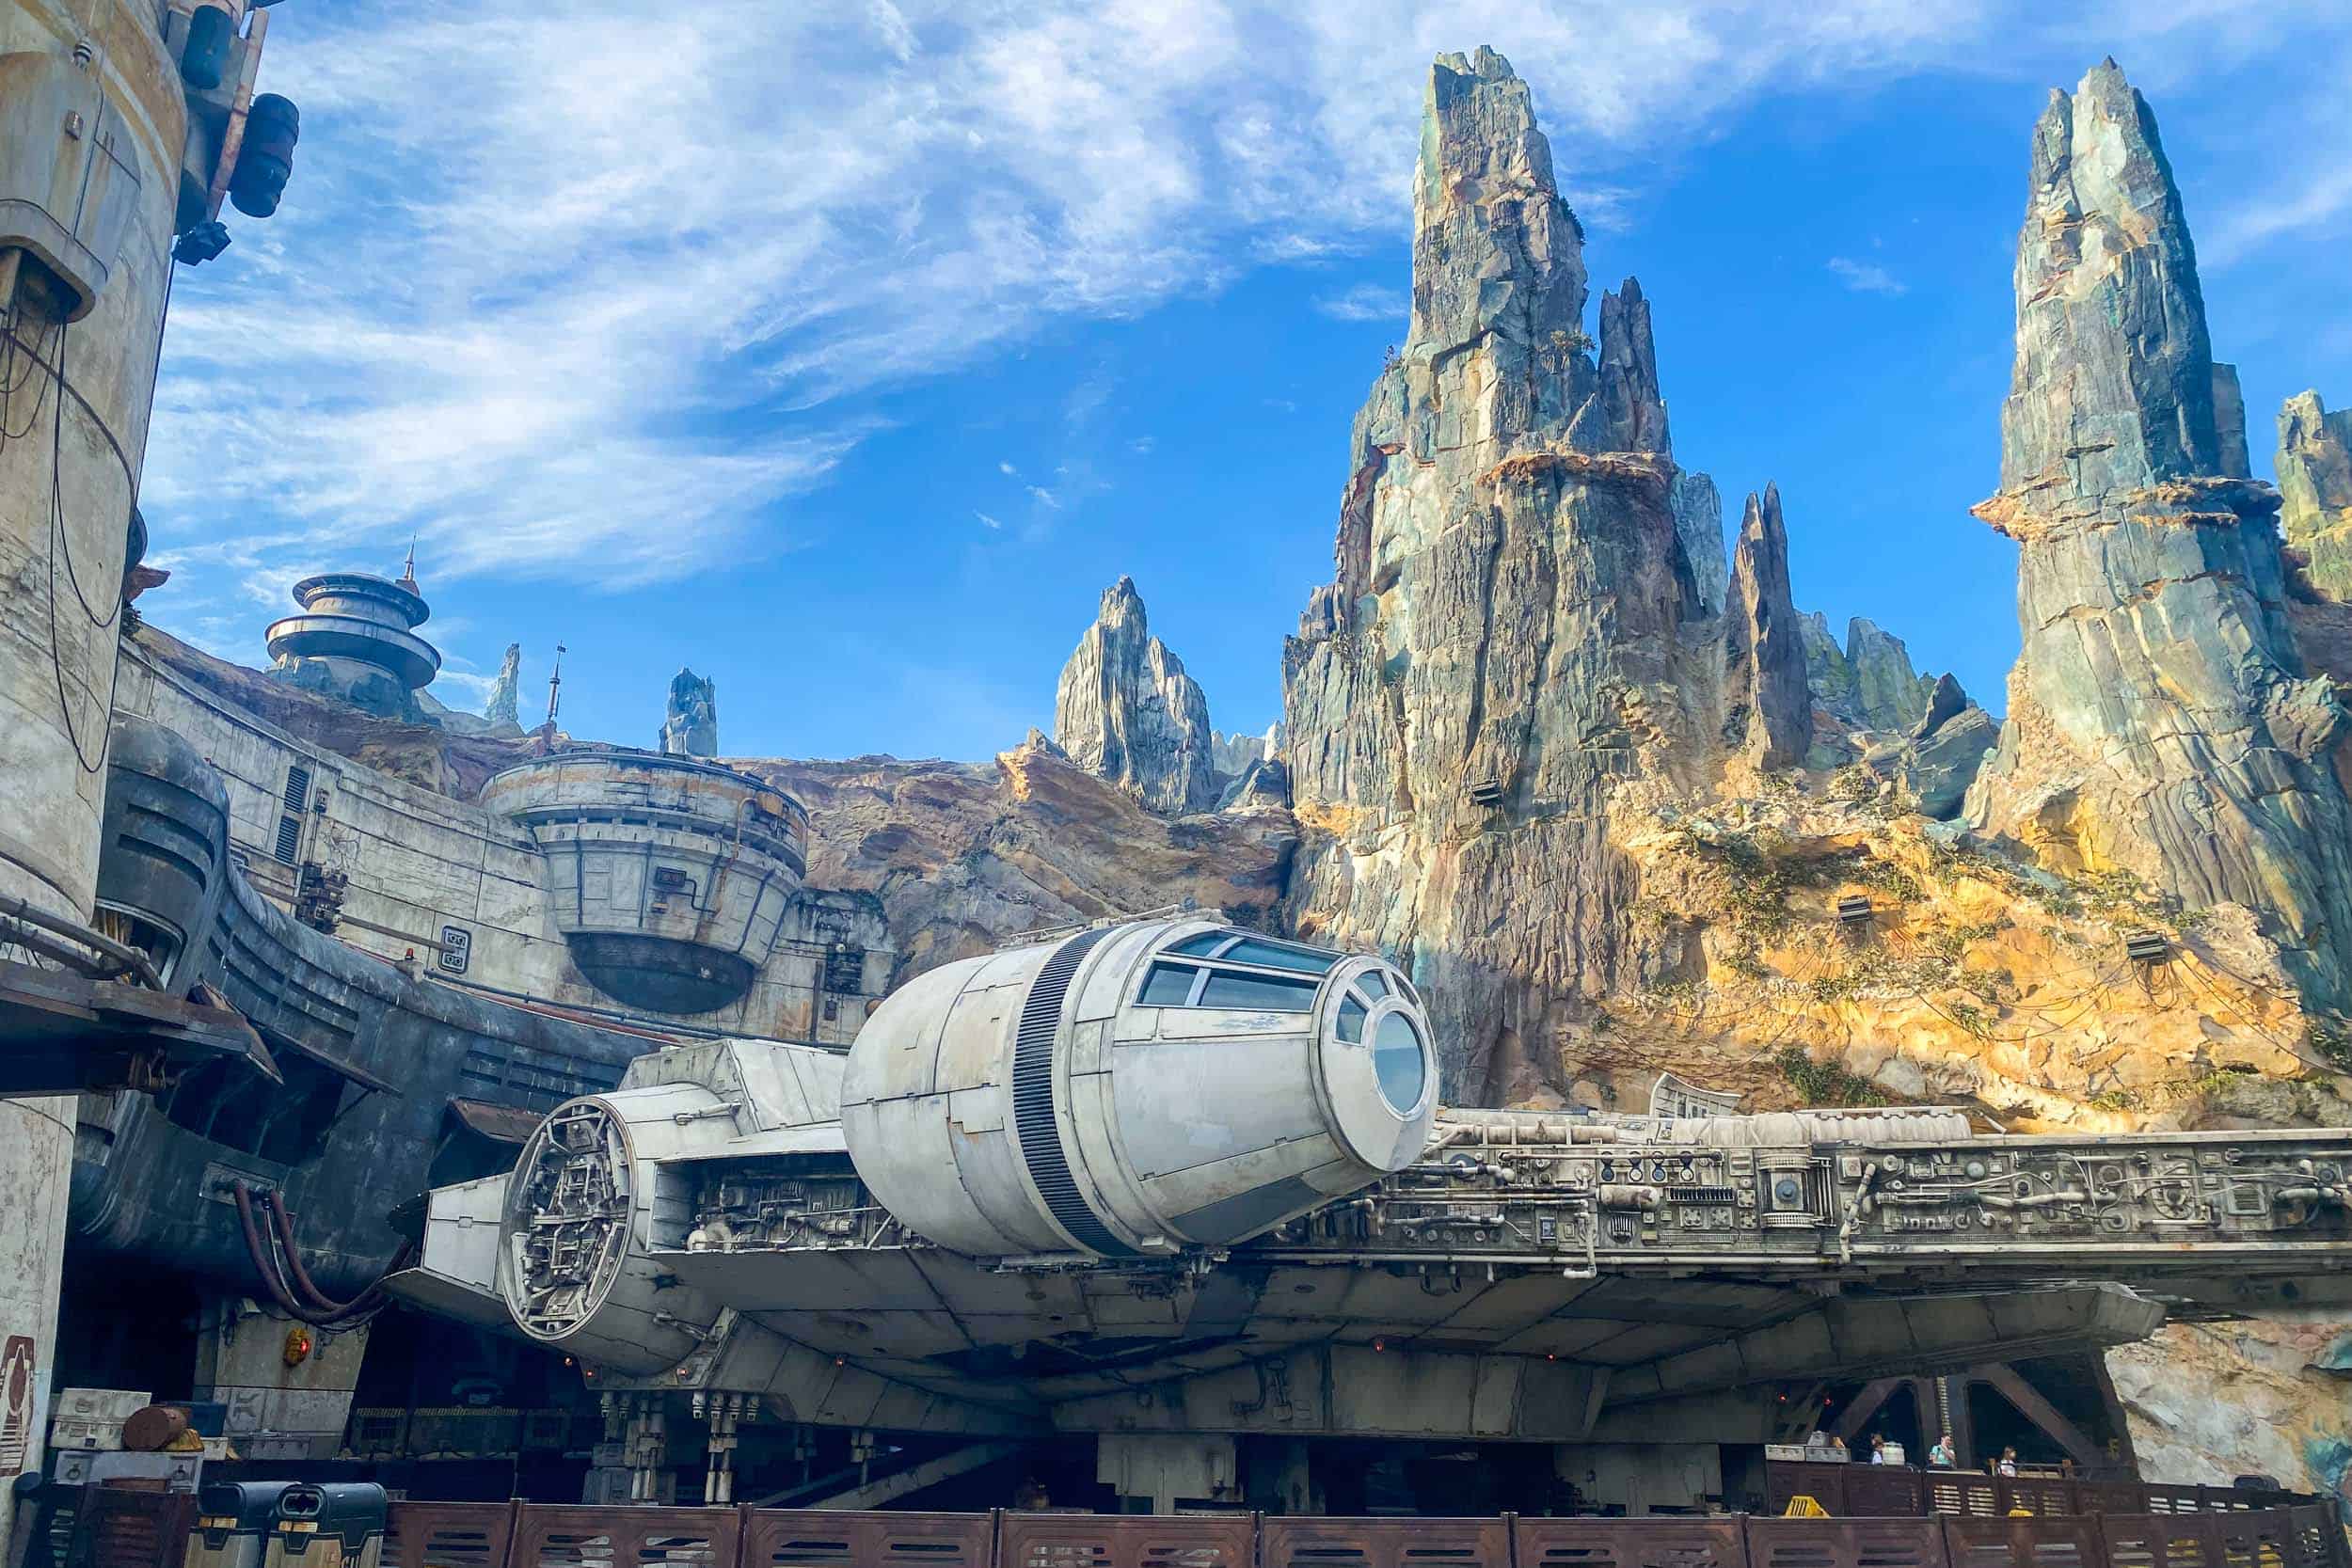 Millennium Falcon Smugglers Run is one of the best things to do at Hollywood Studios Orlando